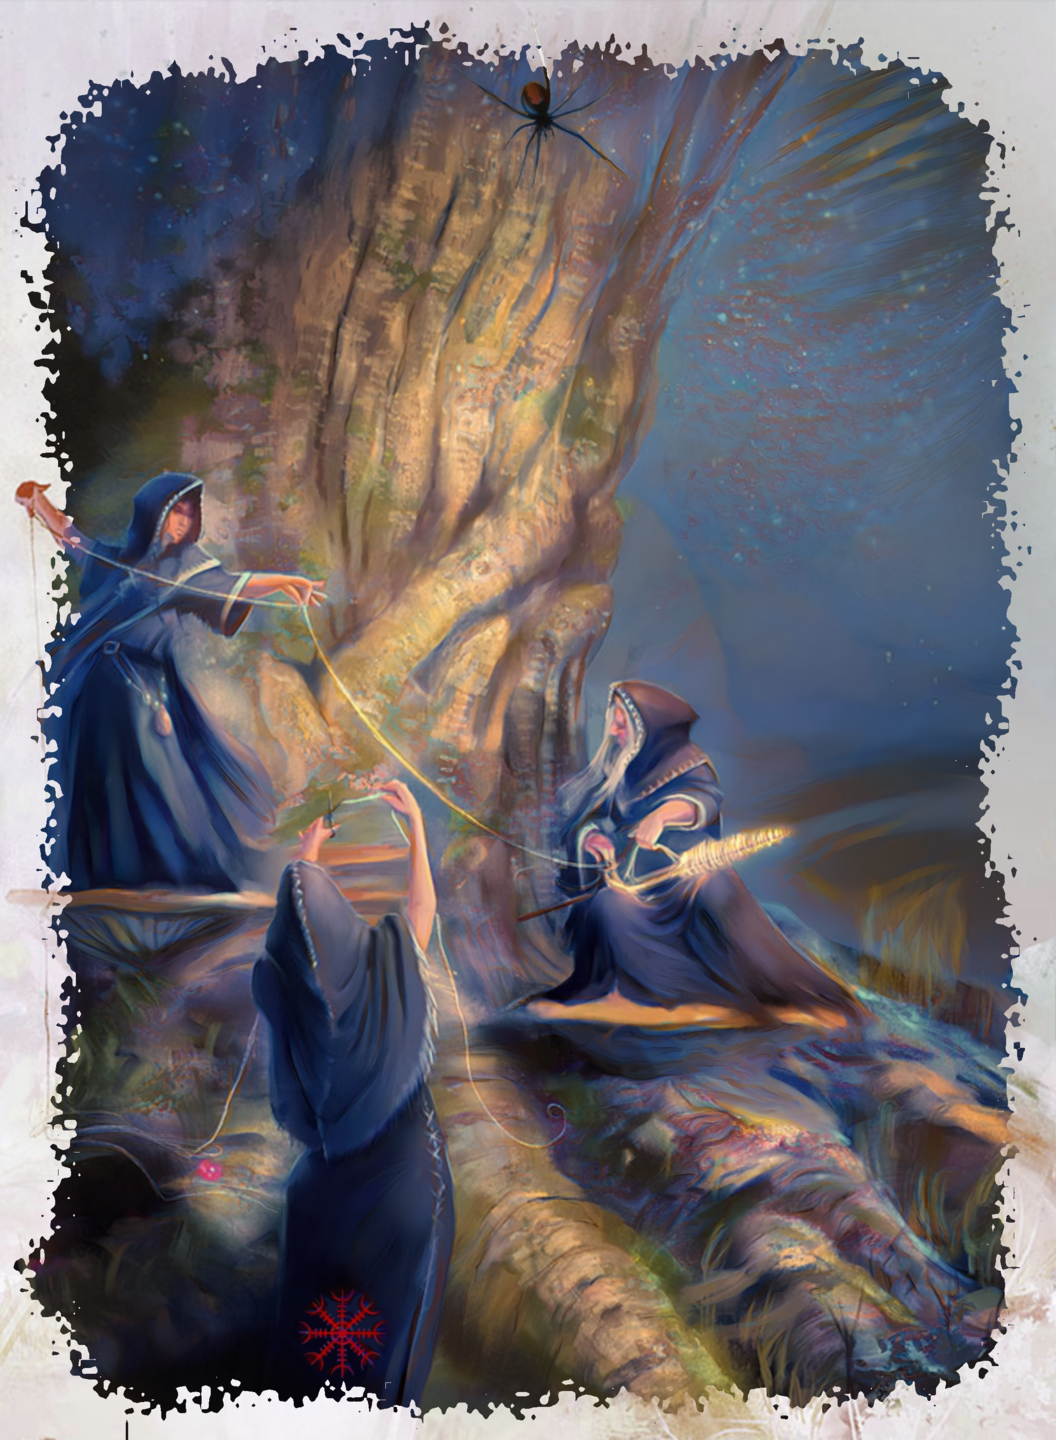 Yggdrasil and the Norns